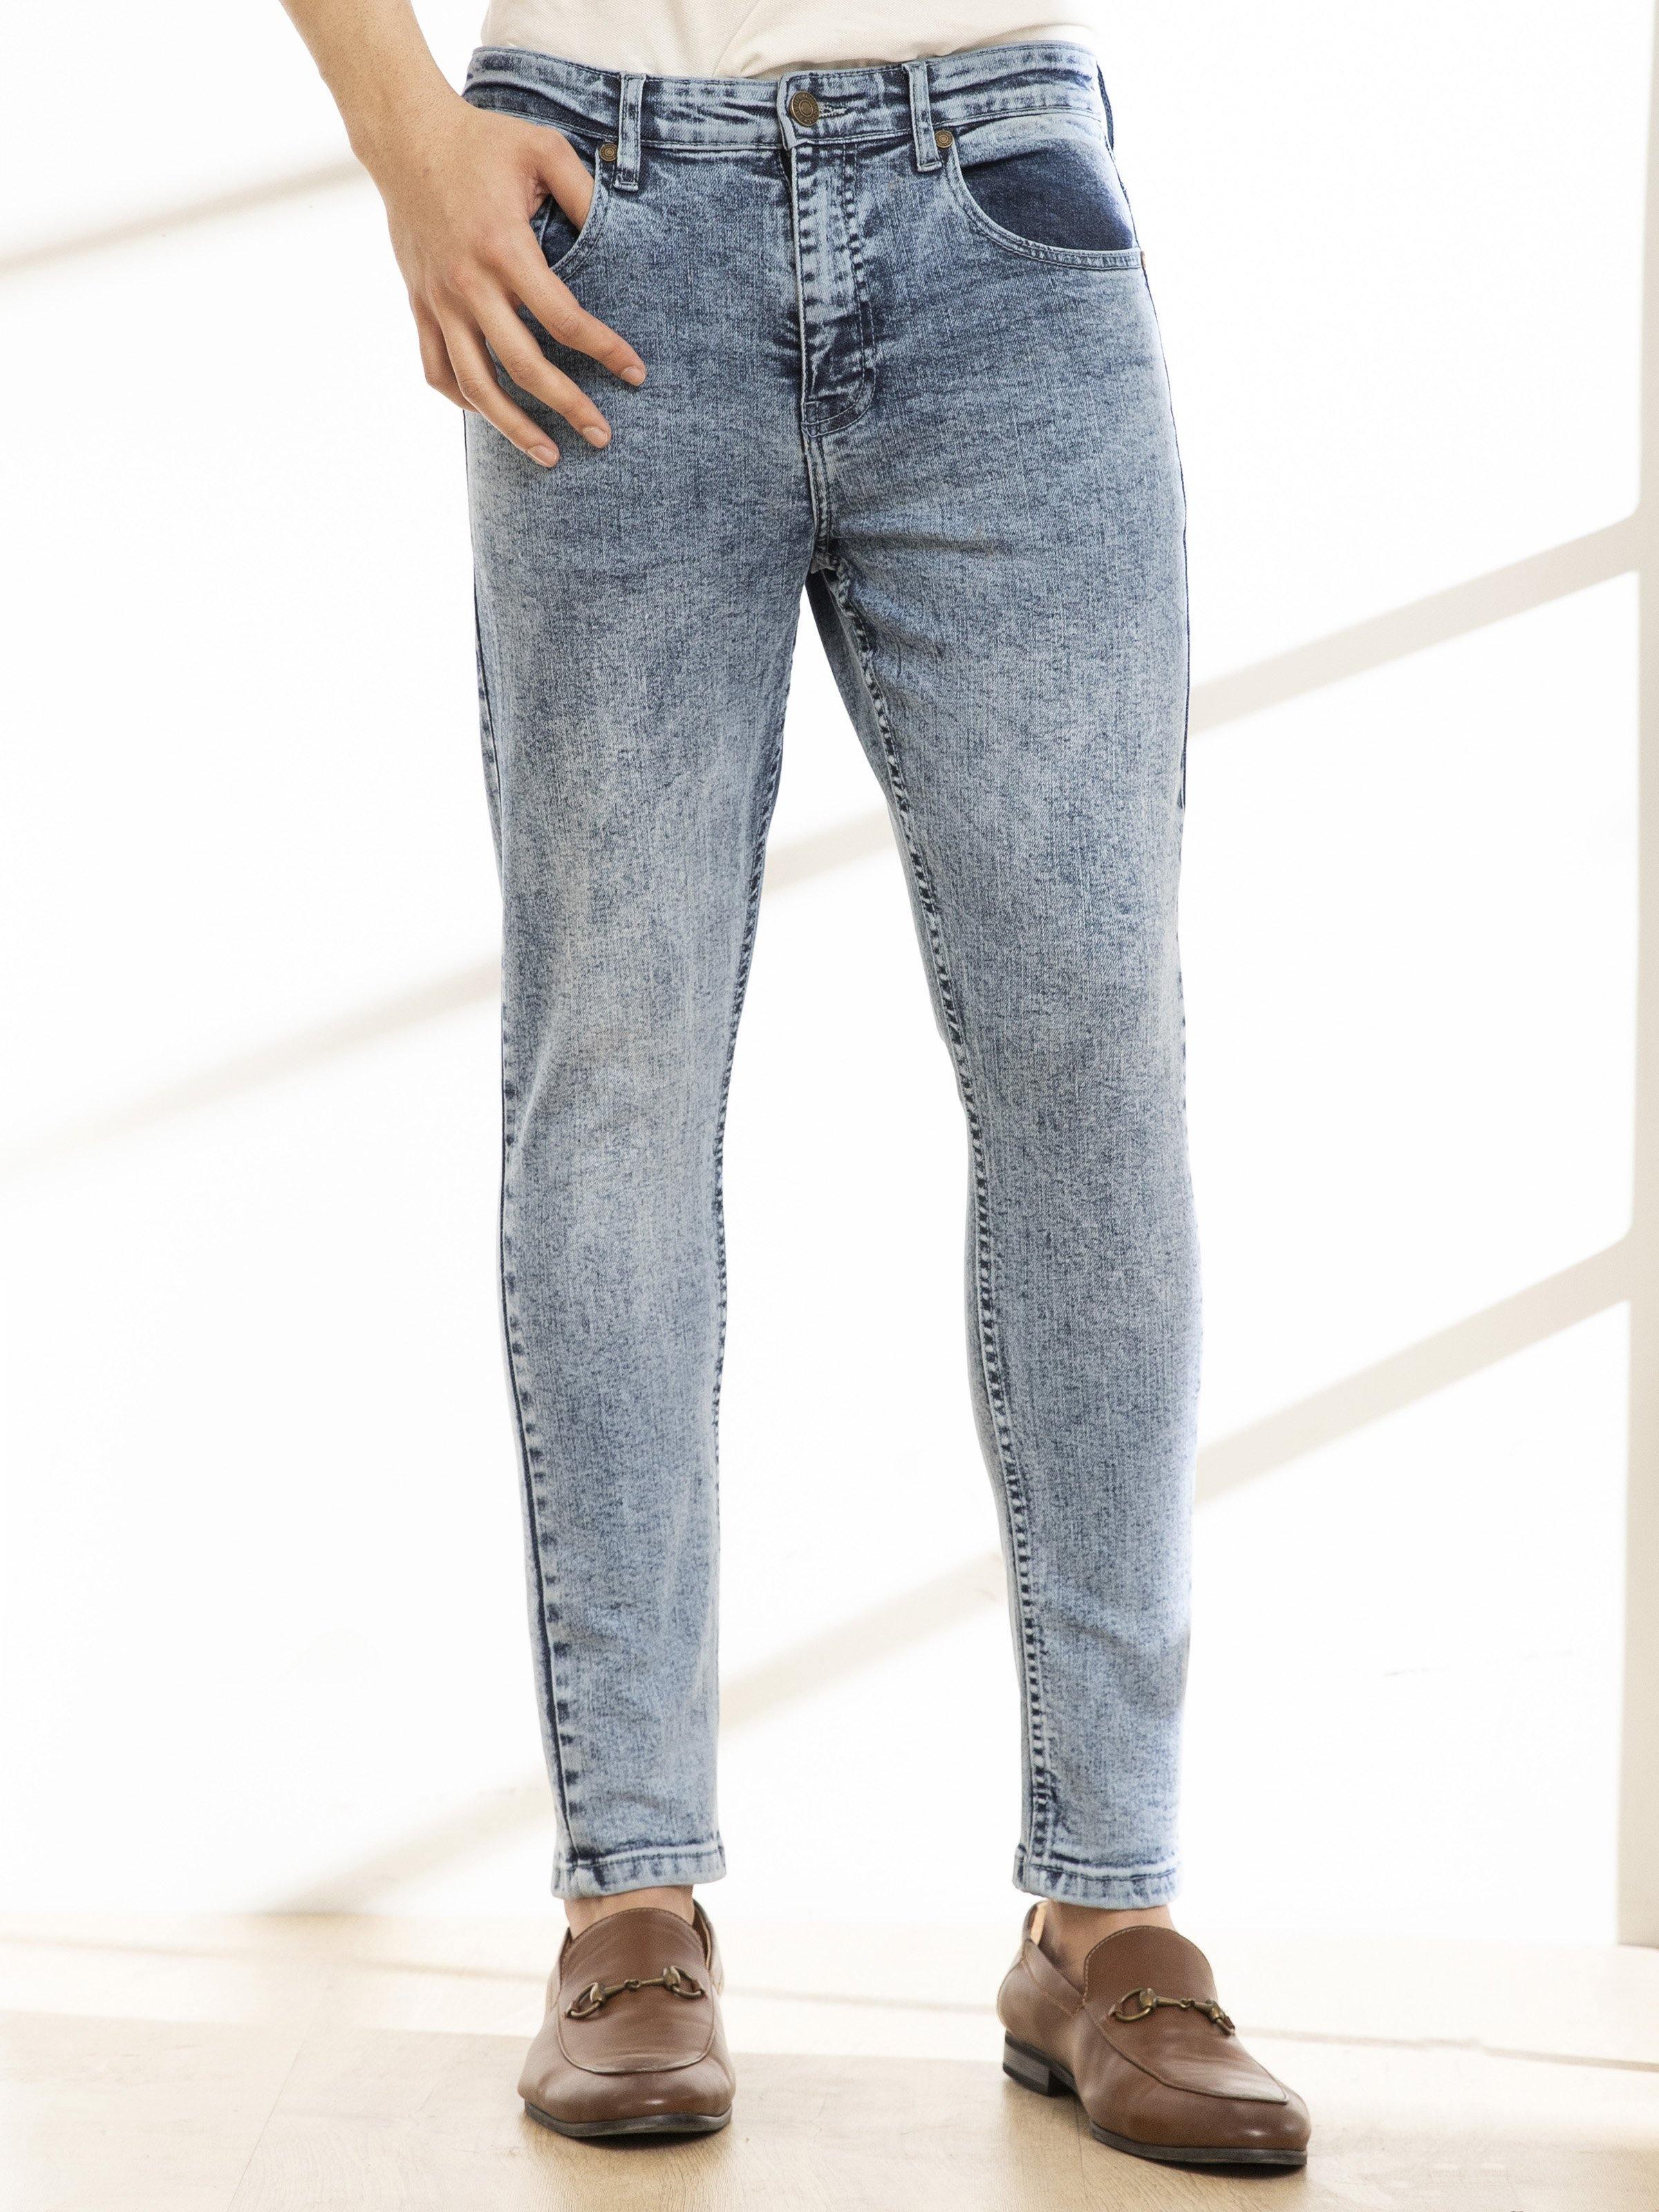 SKINNY LEG JEANS LIGHT BLUE at Charcoal Clothing